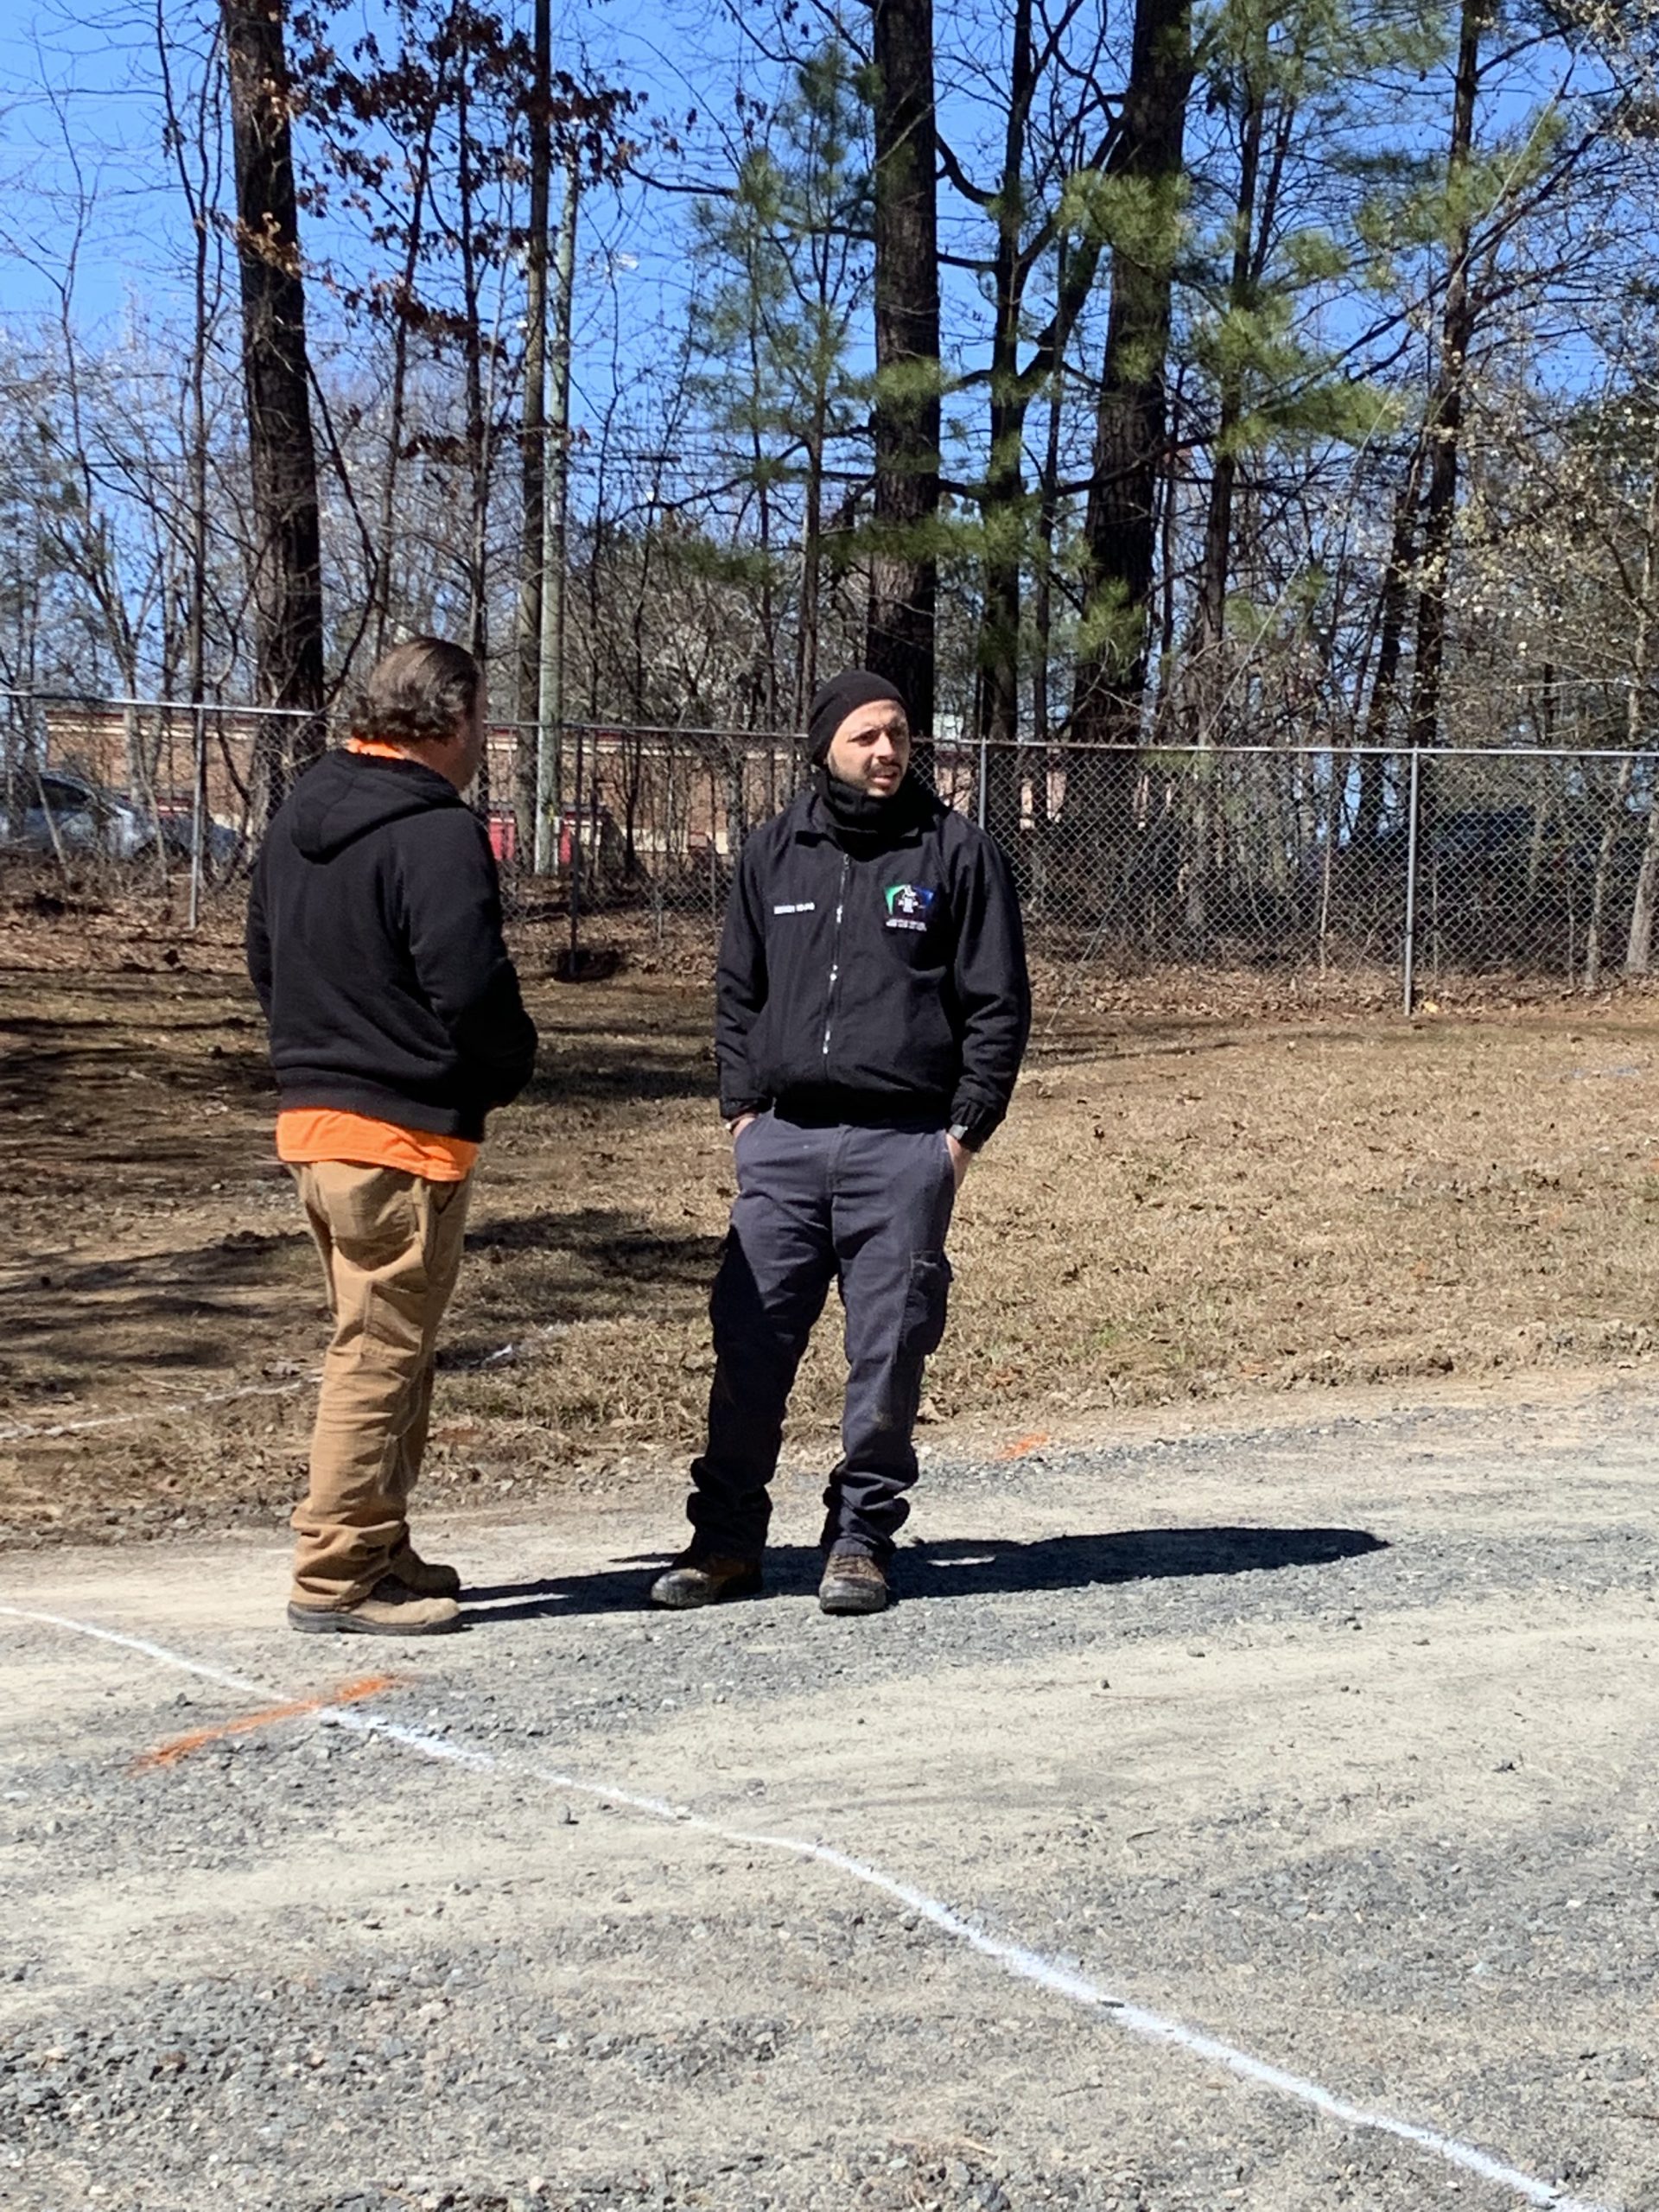 PROJECTS RF USA. Image 3. Our staff interacting with station staff (03/06/2019) 